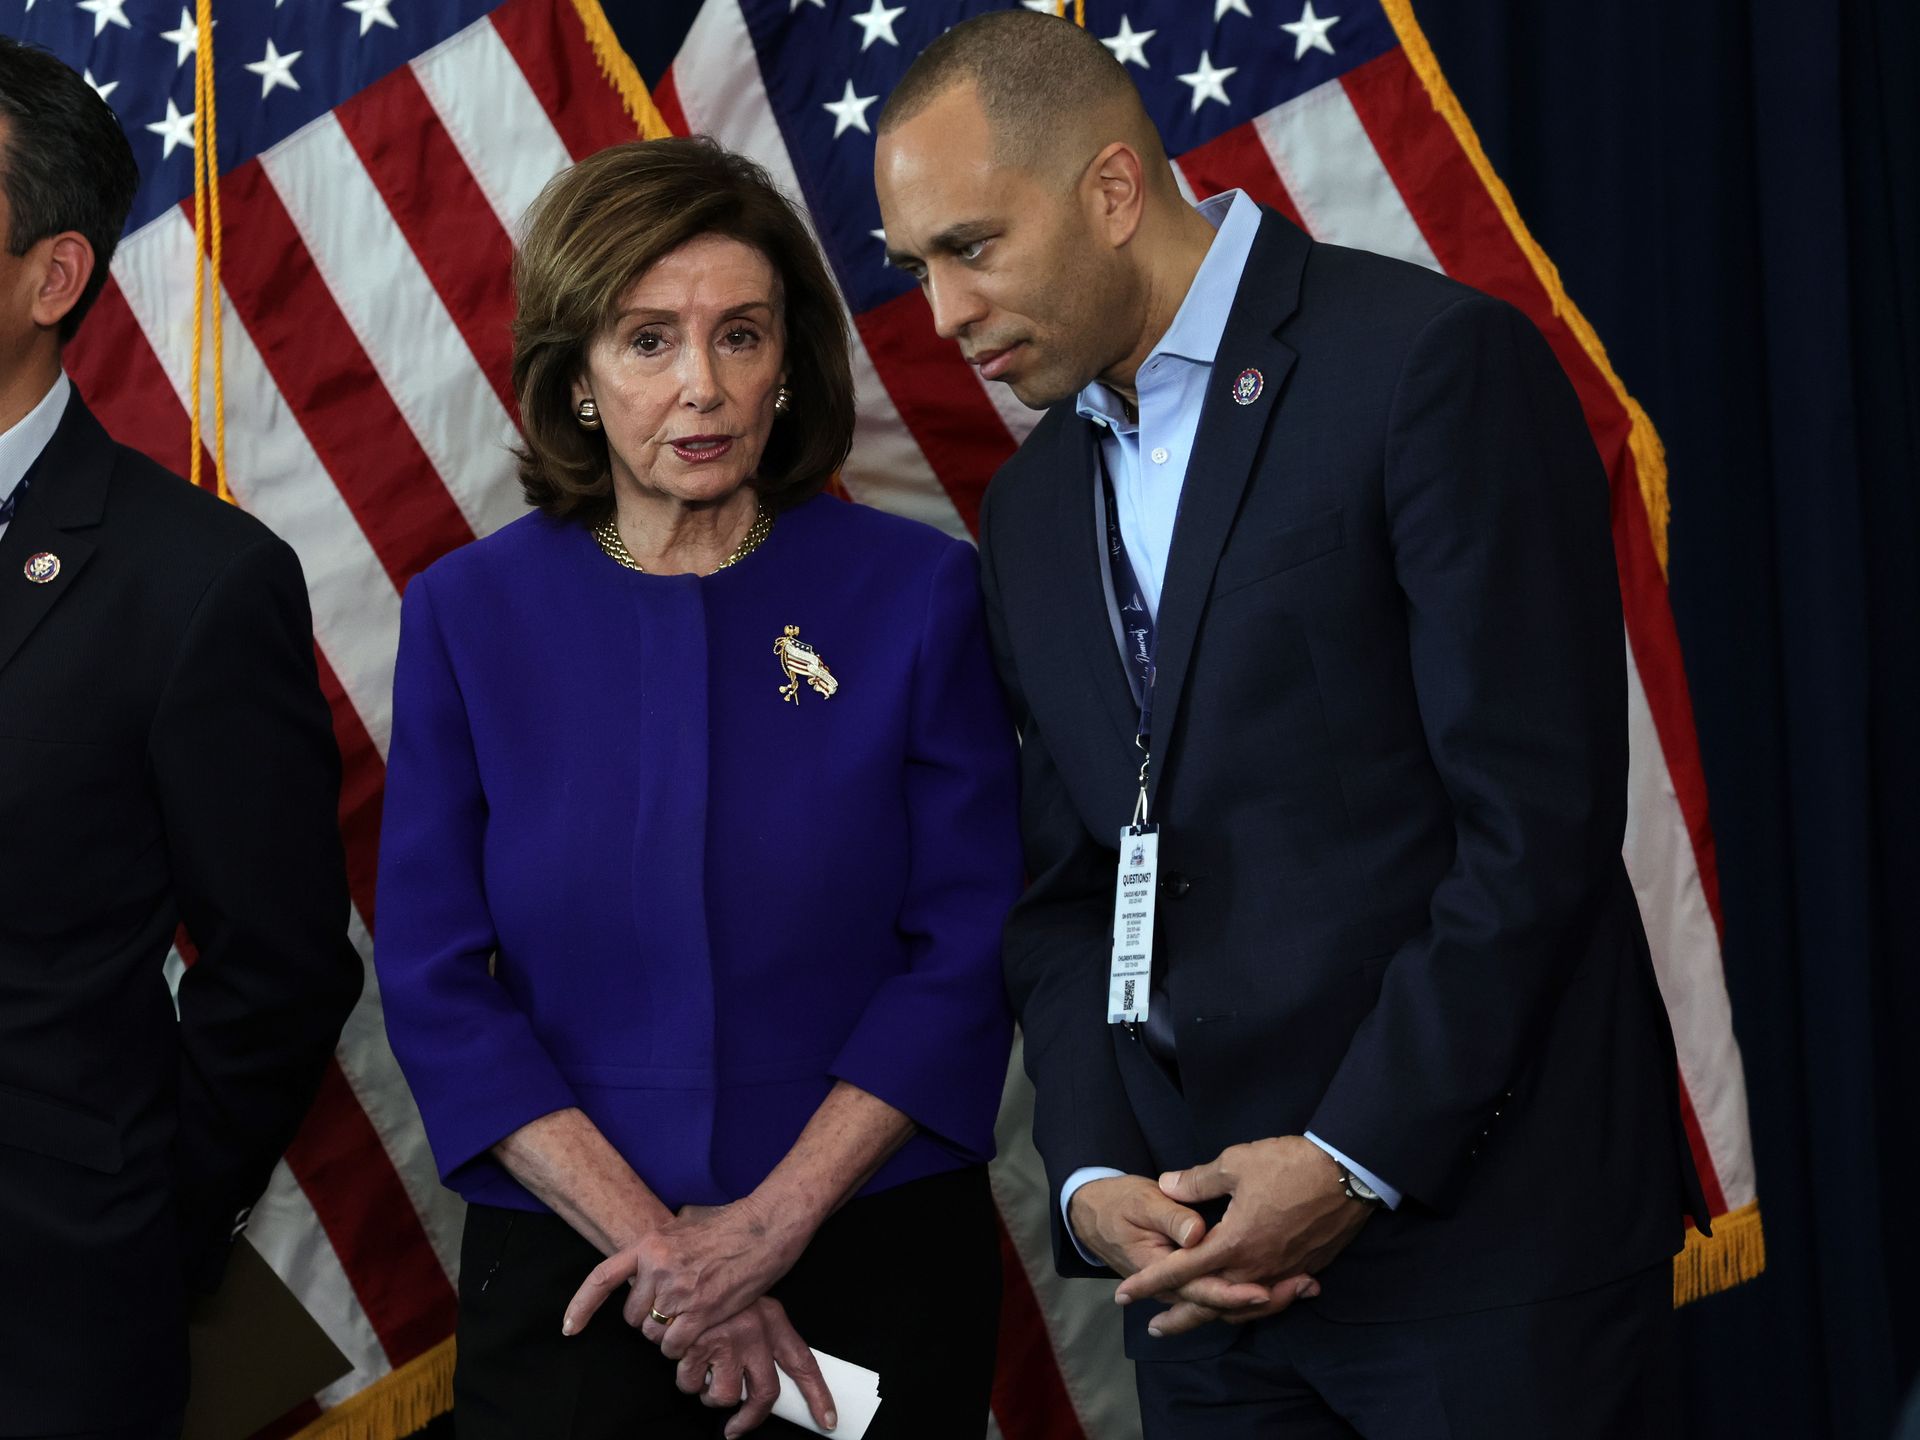 House leader changes: Democrats' likely new leaders after Pelosi steps down